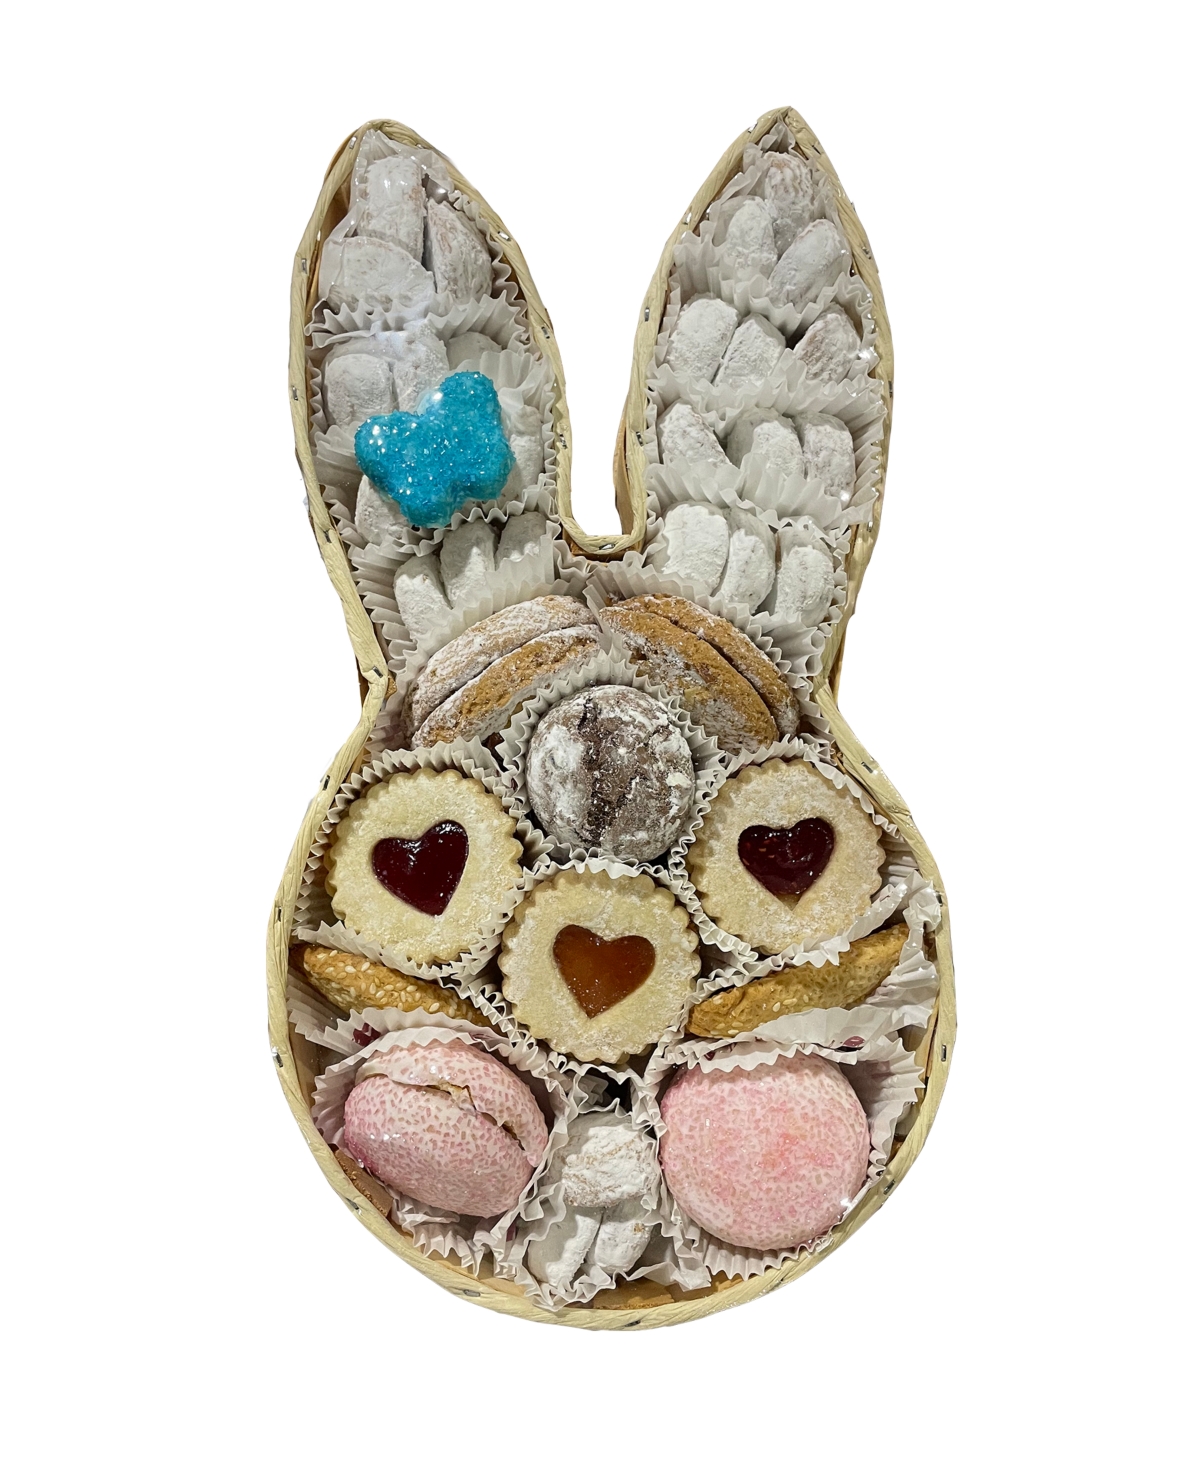 Cookies Con Amore 24 oz Easter Bunny Shaped Handmade Assorted Cookie Gift Basket